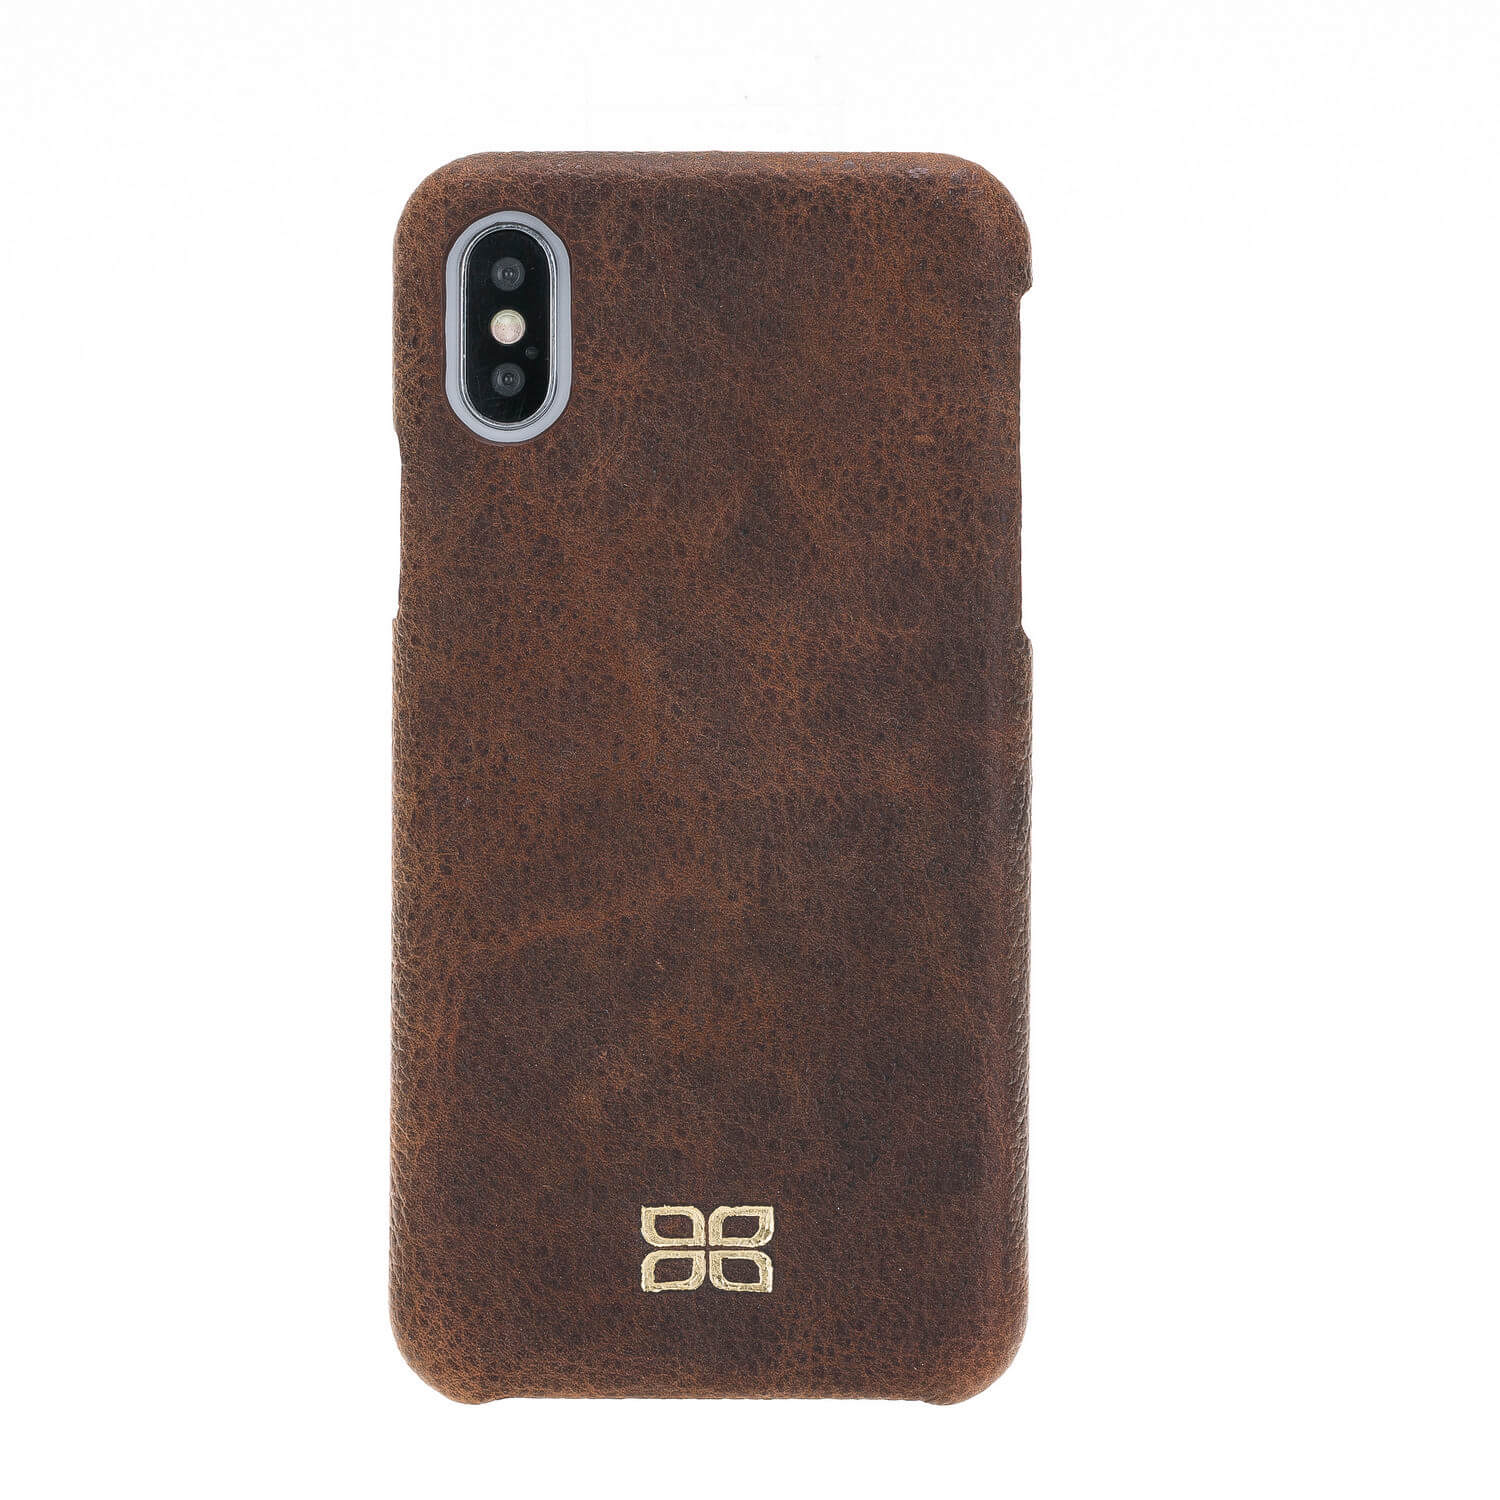 F360 Leather Back Cover Case for Apple iPhone X / iPhone XS